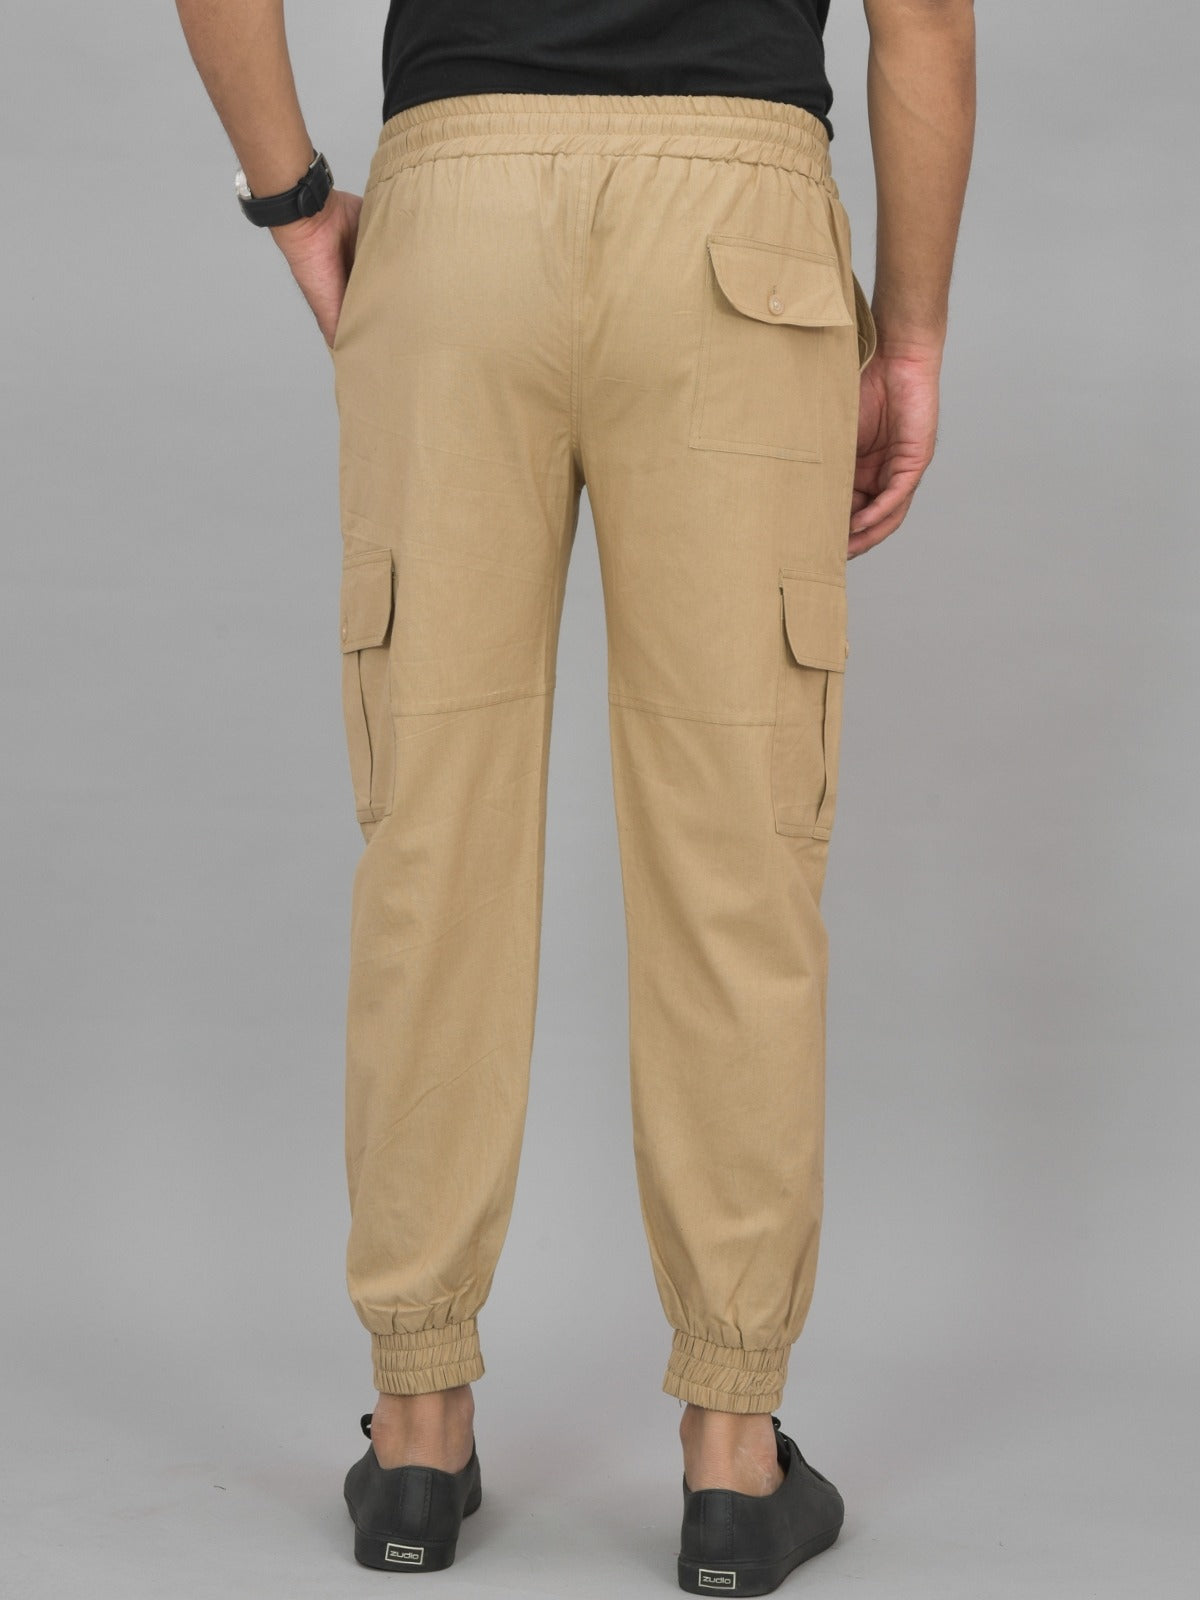 Combo Pack Of Mens Beige And Navy Blue Five Pocket Cotton Cargo Pants